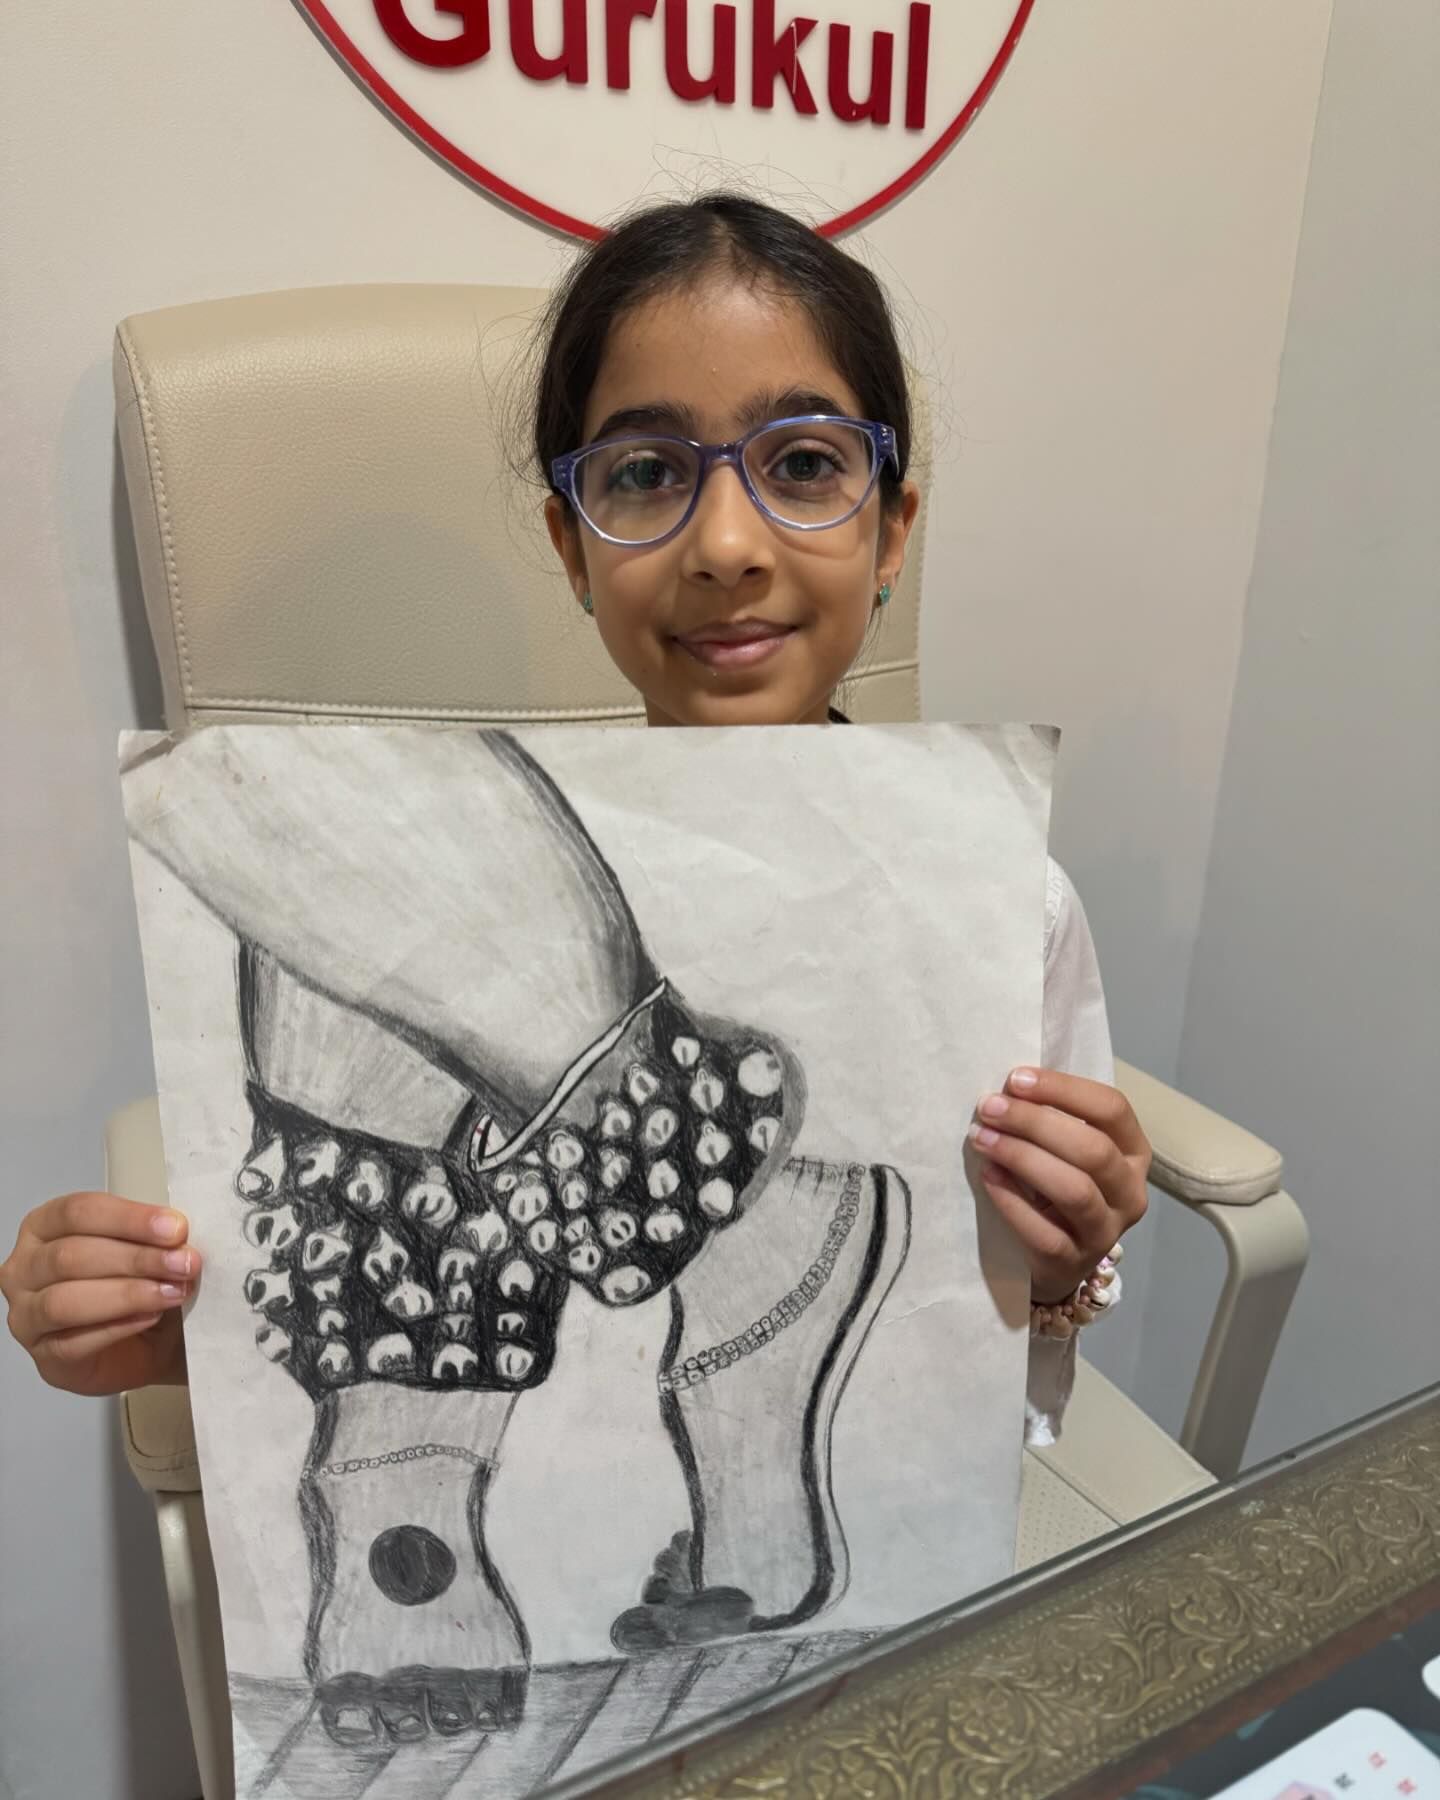 Ameera Muhammad, a kathak learner of Grade 2 at Gurukul is also a budding artist of sorts. Securing a top position in her school, Ameera presented her work to us today at the studio. We’re hiring her for sure!!!